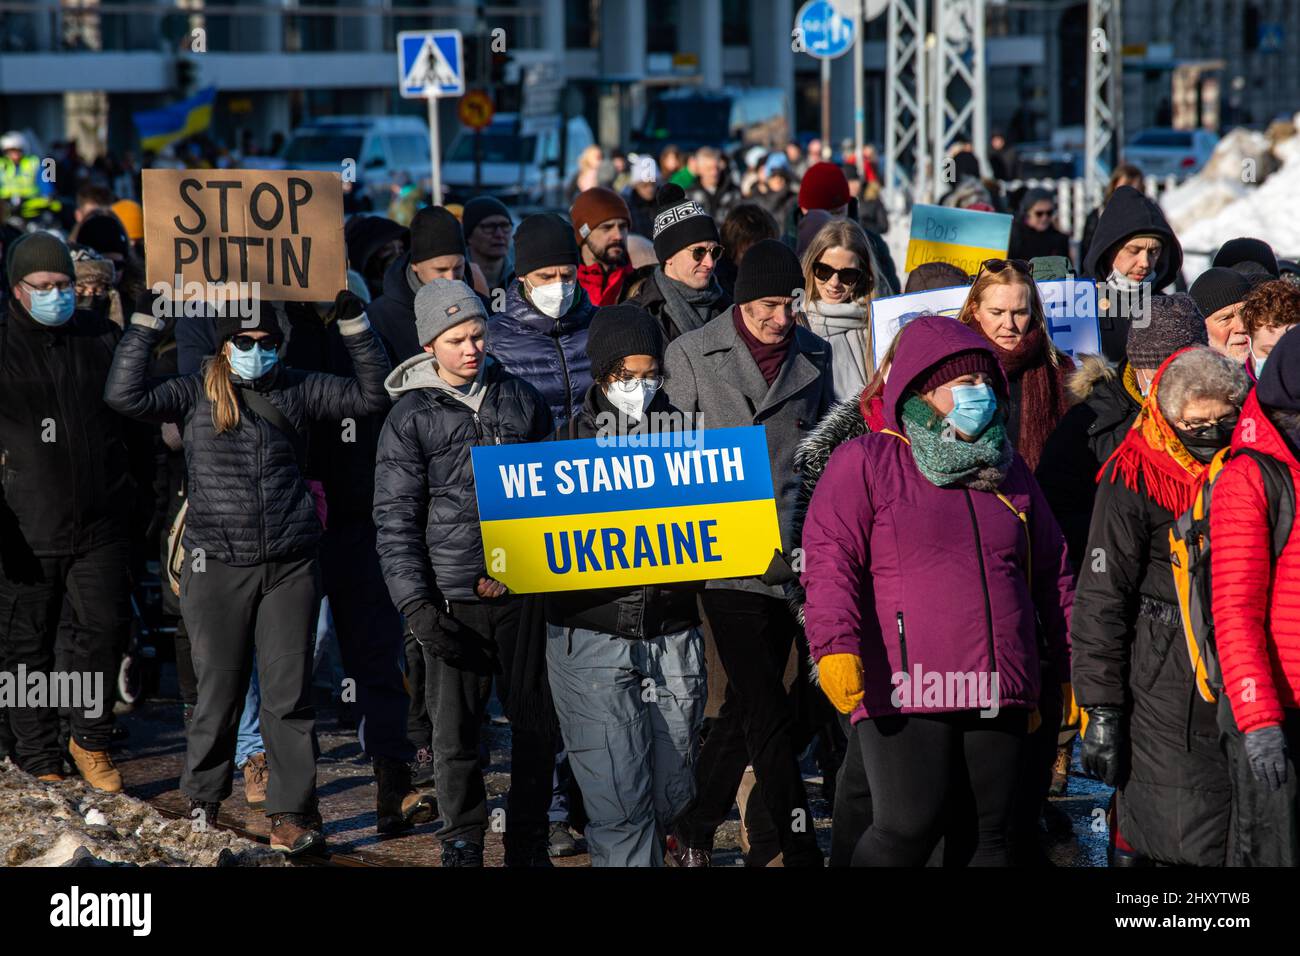 We stand with Ukraine. Woman holding a sign or placard at protest against invasion of Ukraine in Helsinki, Finland. Stock Photo